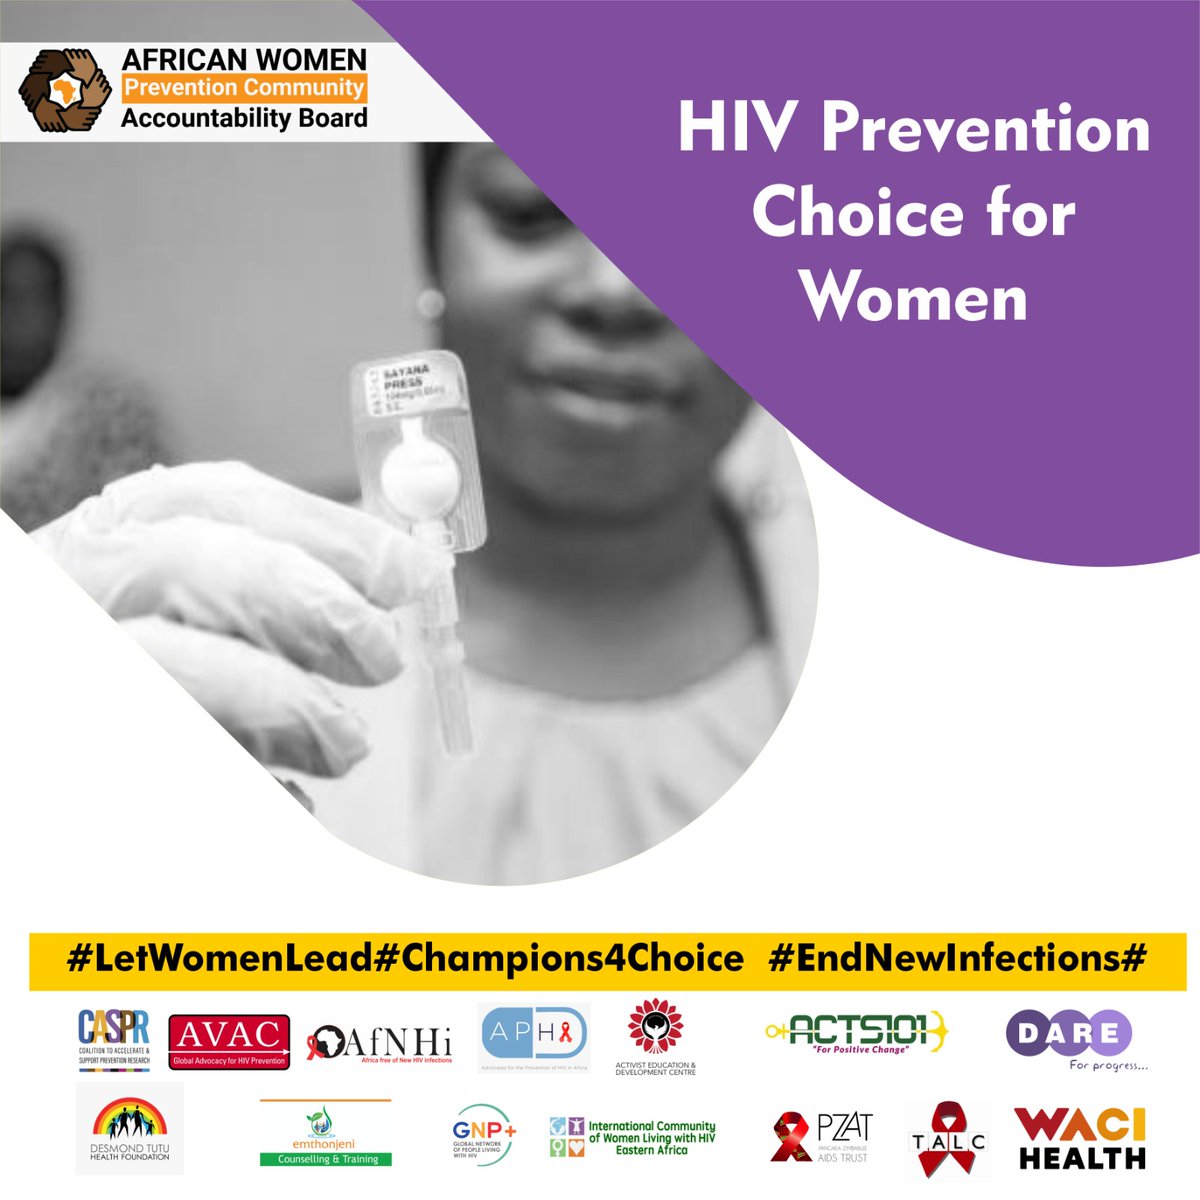 #Champions4Choice Empower women with choice by providing an array of effective accessible biomedical options that they can control #EndNewInfections #ChoiceManifesto @UNAIDS @HIVpxresearch @apha_sa @USAmbGHSD @UNITAID @DTHF_SA @ICWEastAfrica @WACIHealth